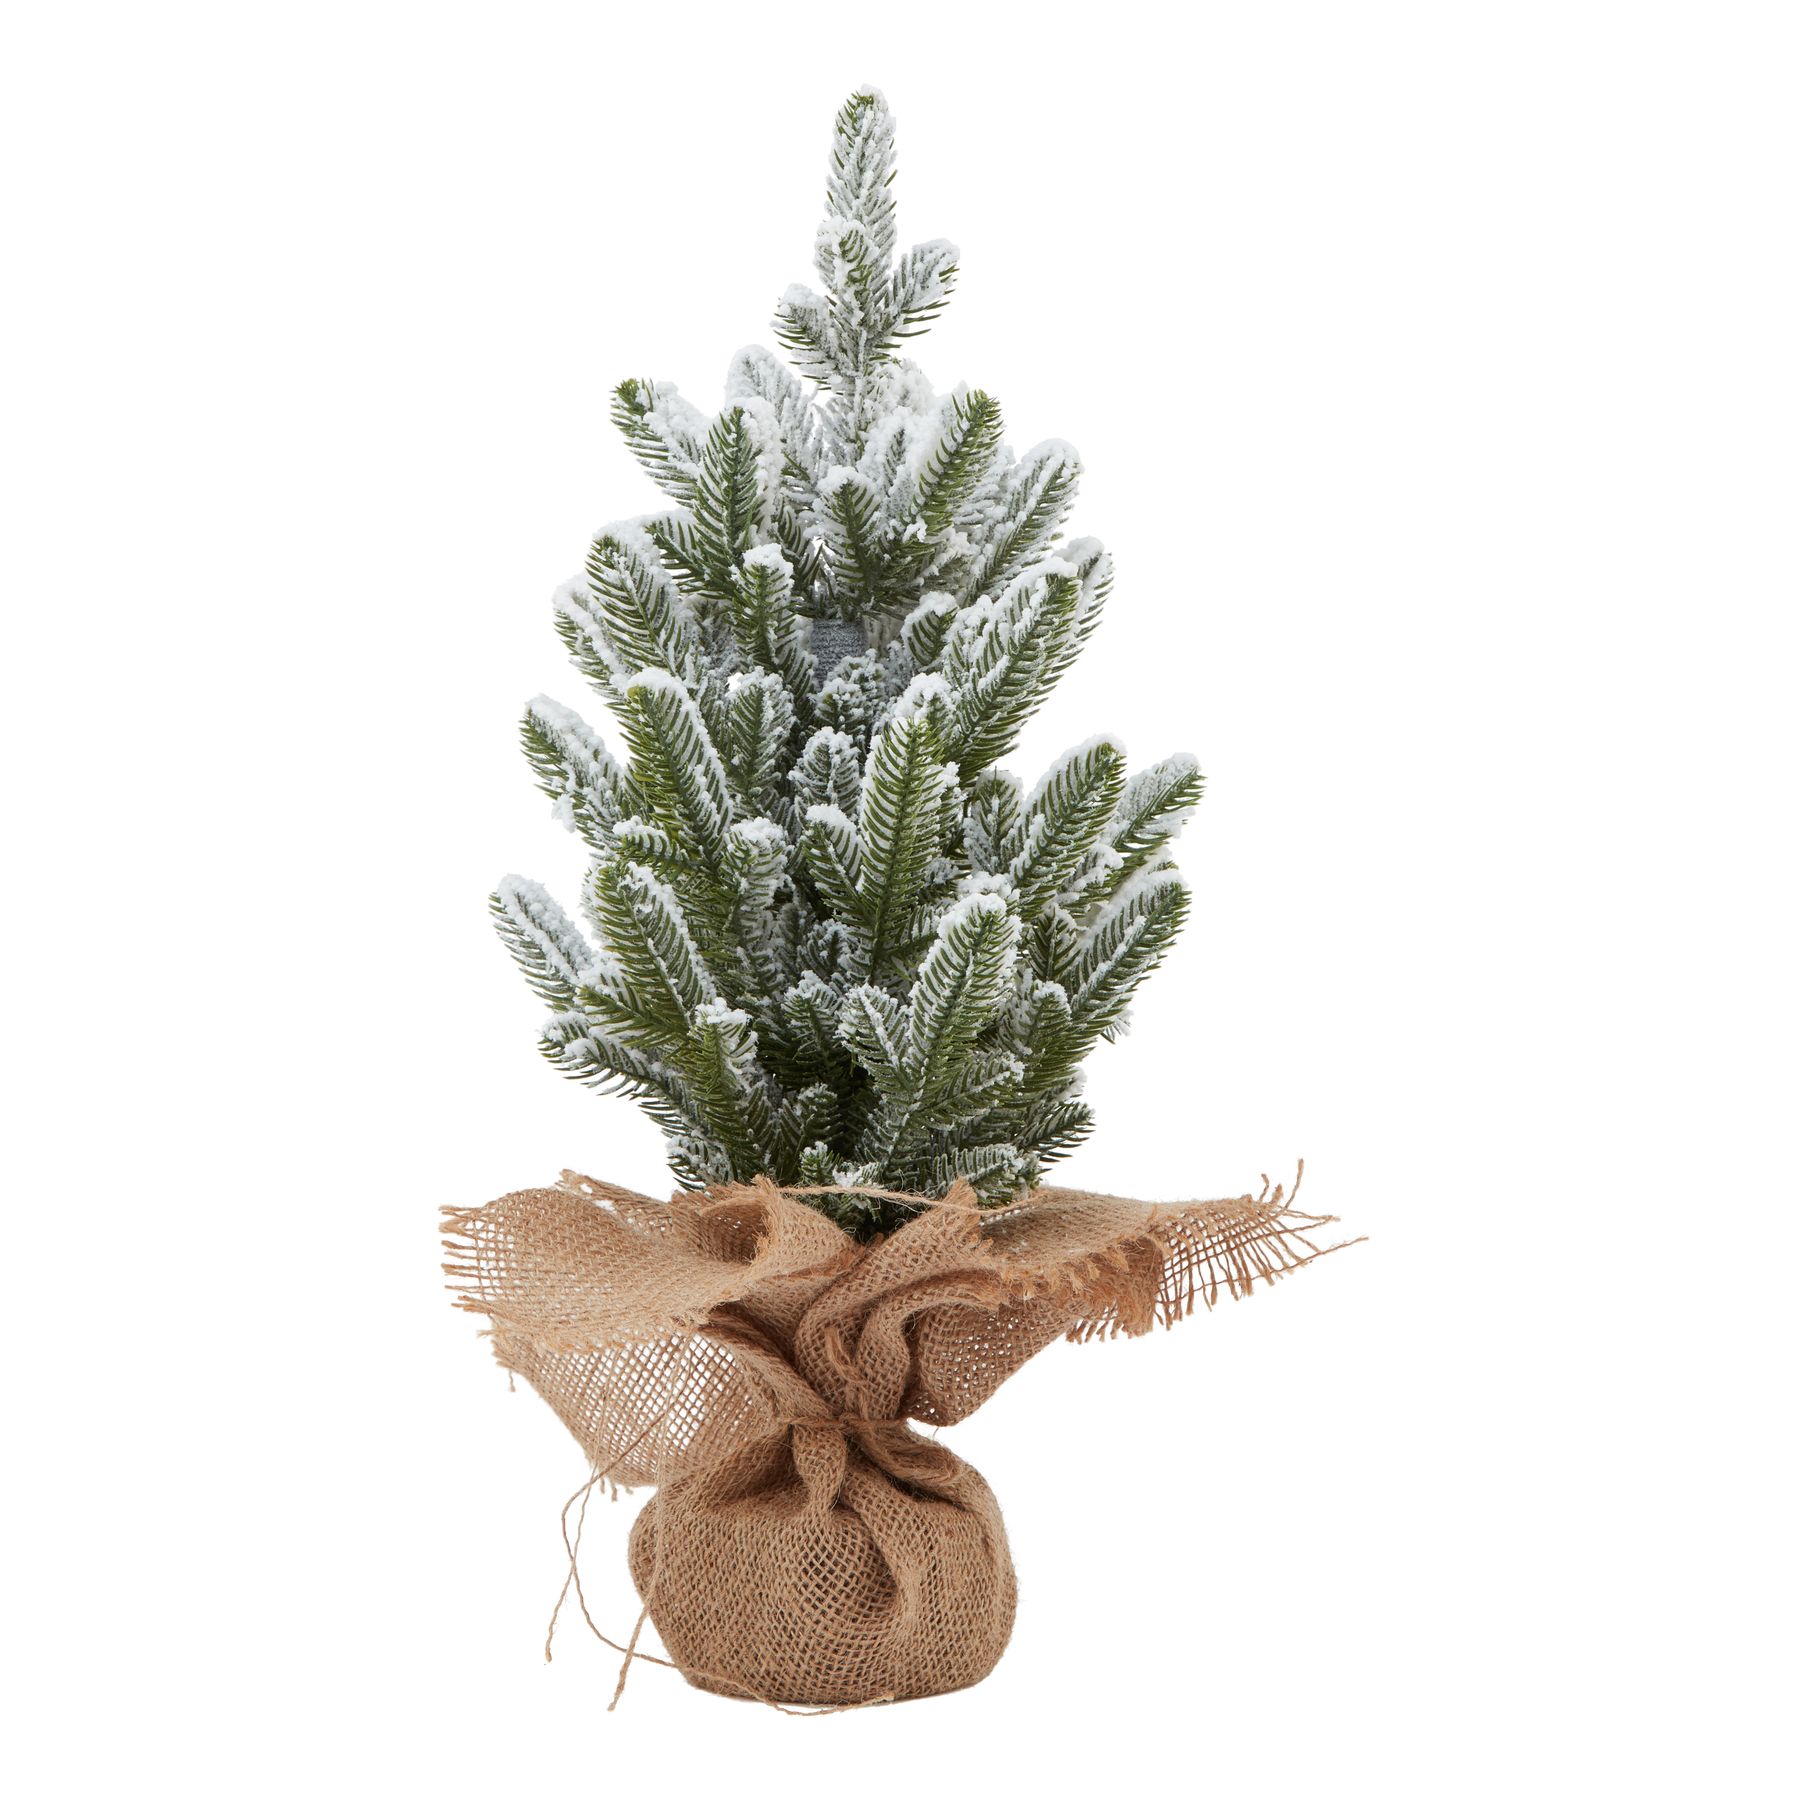 Snowy Potted Christmas Pine Tree with Hessian Base - Image 1